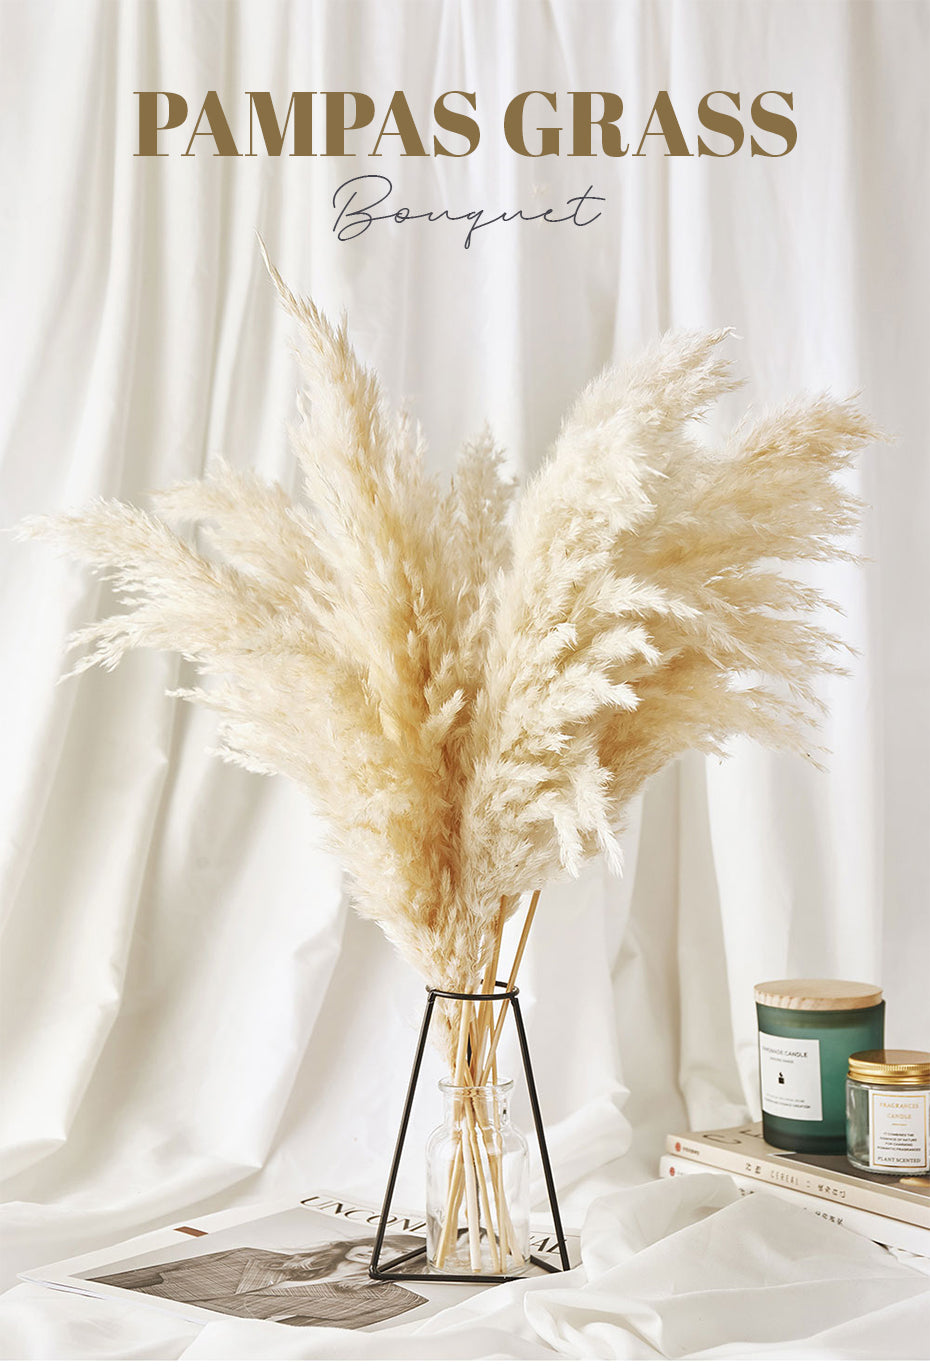 Real Pampas Grass Natural Dried Flowers Modern Bohemian Home Styling Bleached White Color Fluffy Natural Floral Bouquet For Boho Style Home Interior Decor